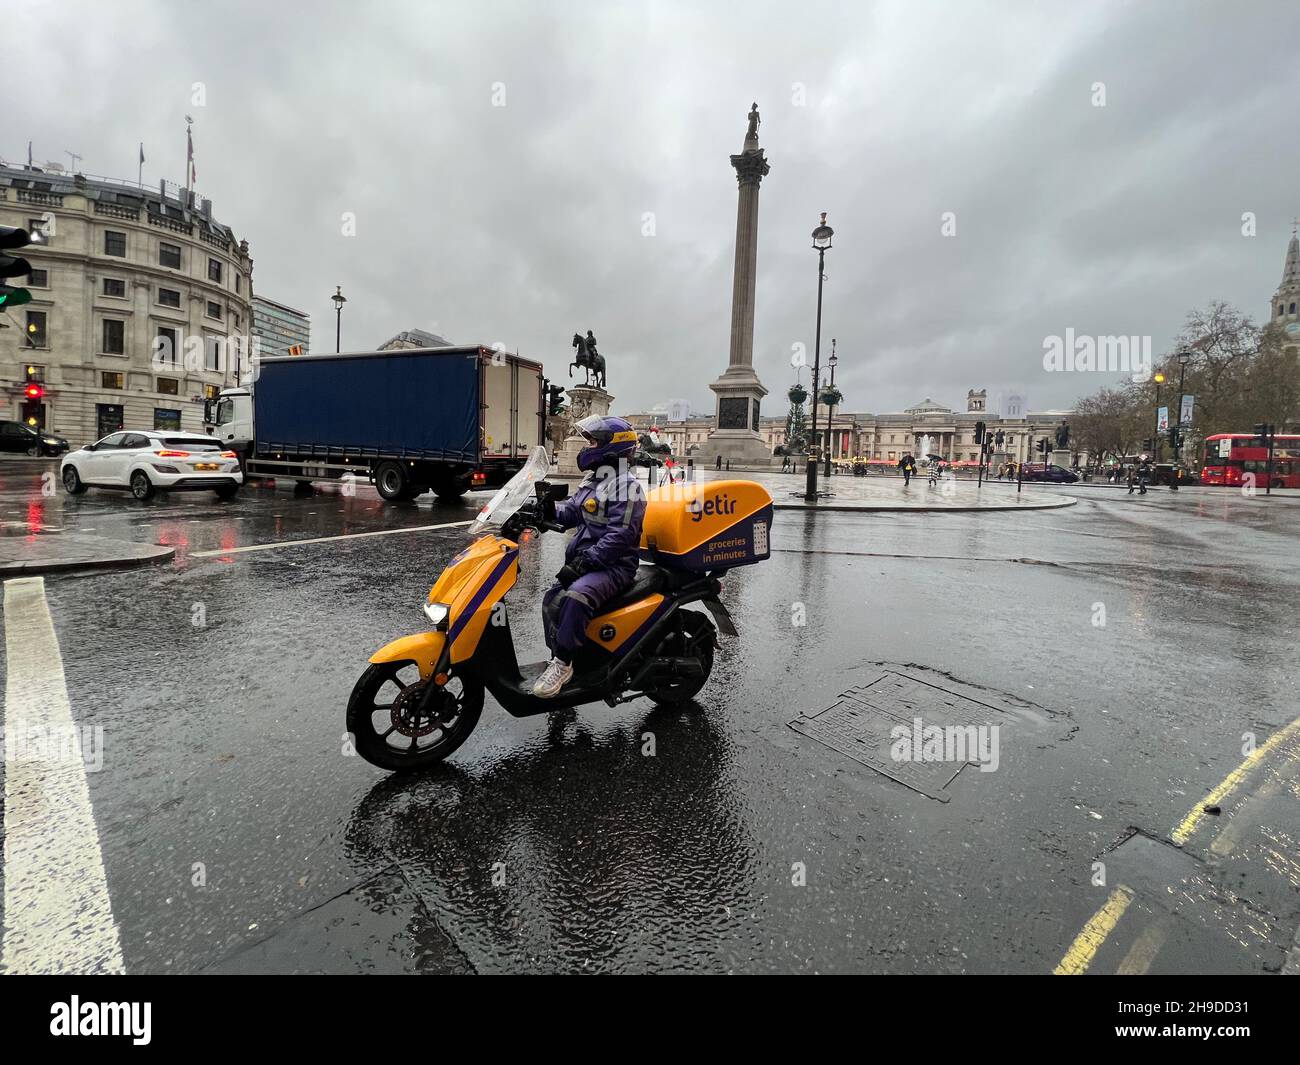 London, UK. 06th Dec, 2021. A driver for Getir delivery service sits on her scooter near Trafalgar Square in London on Dec. 6, 2021. Getir is an online grocery delivery platform that promises to deliver products within 10 minutes. Getir was started in Istanbul in 2015 and launched in London in January 2021. The start-up also has service in Amsterdam, Berlin, and Paris. (Photo by Samuel Rigelhaupt/Sipa USA) Credit: Sipa USA/Alamy Live News Stock Photo